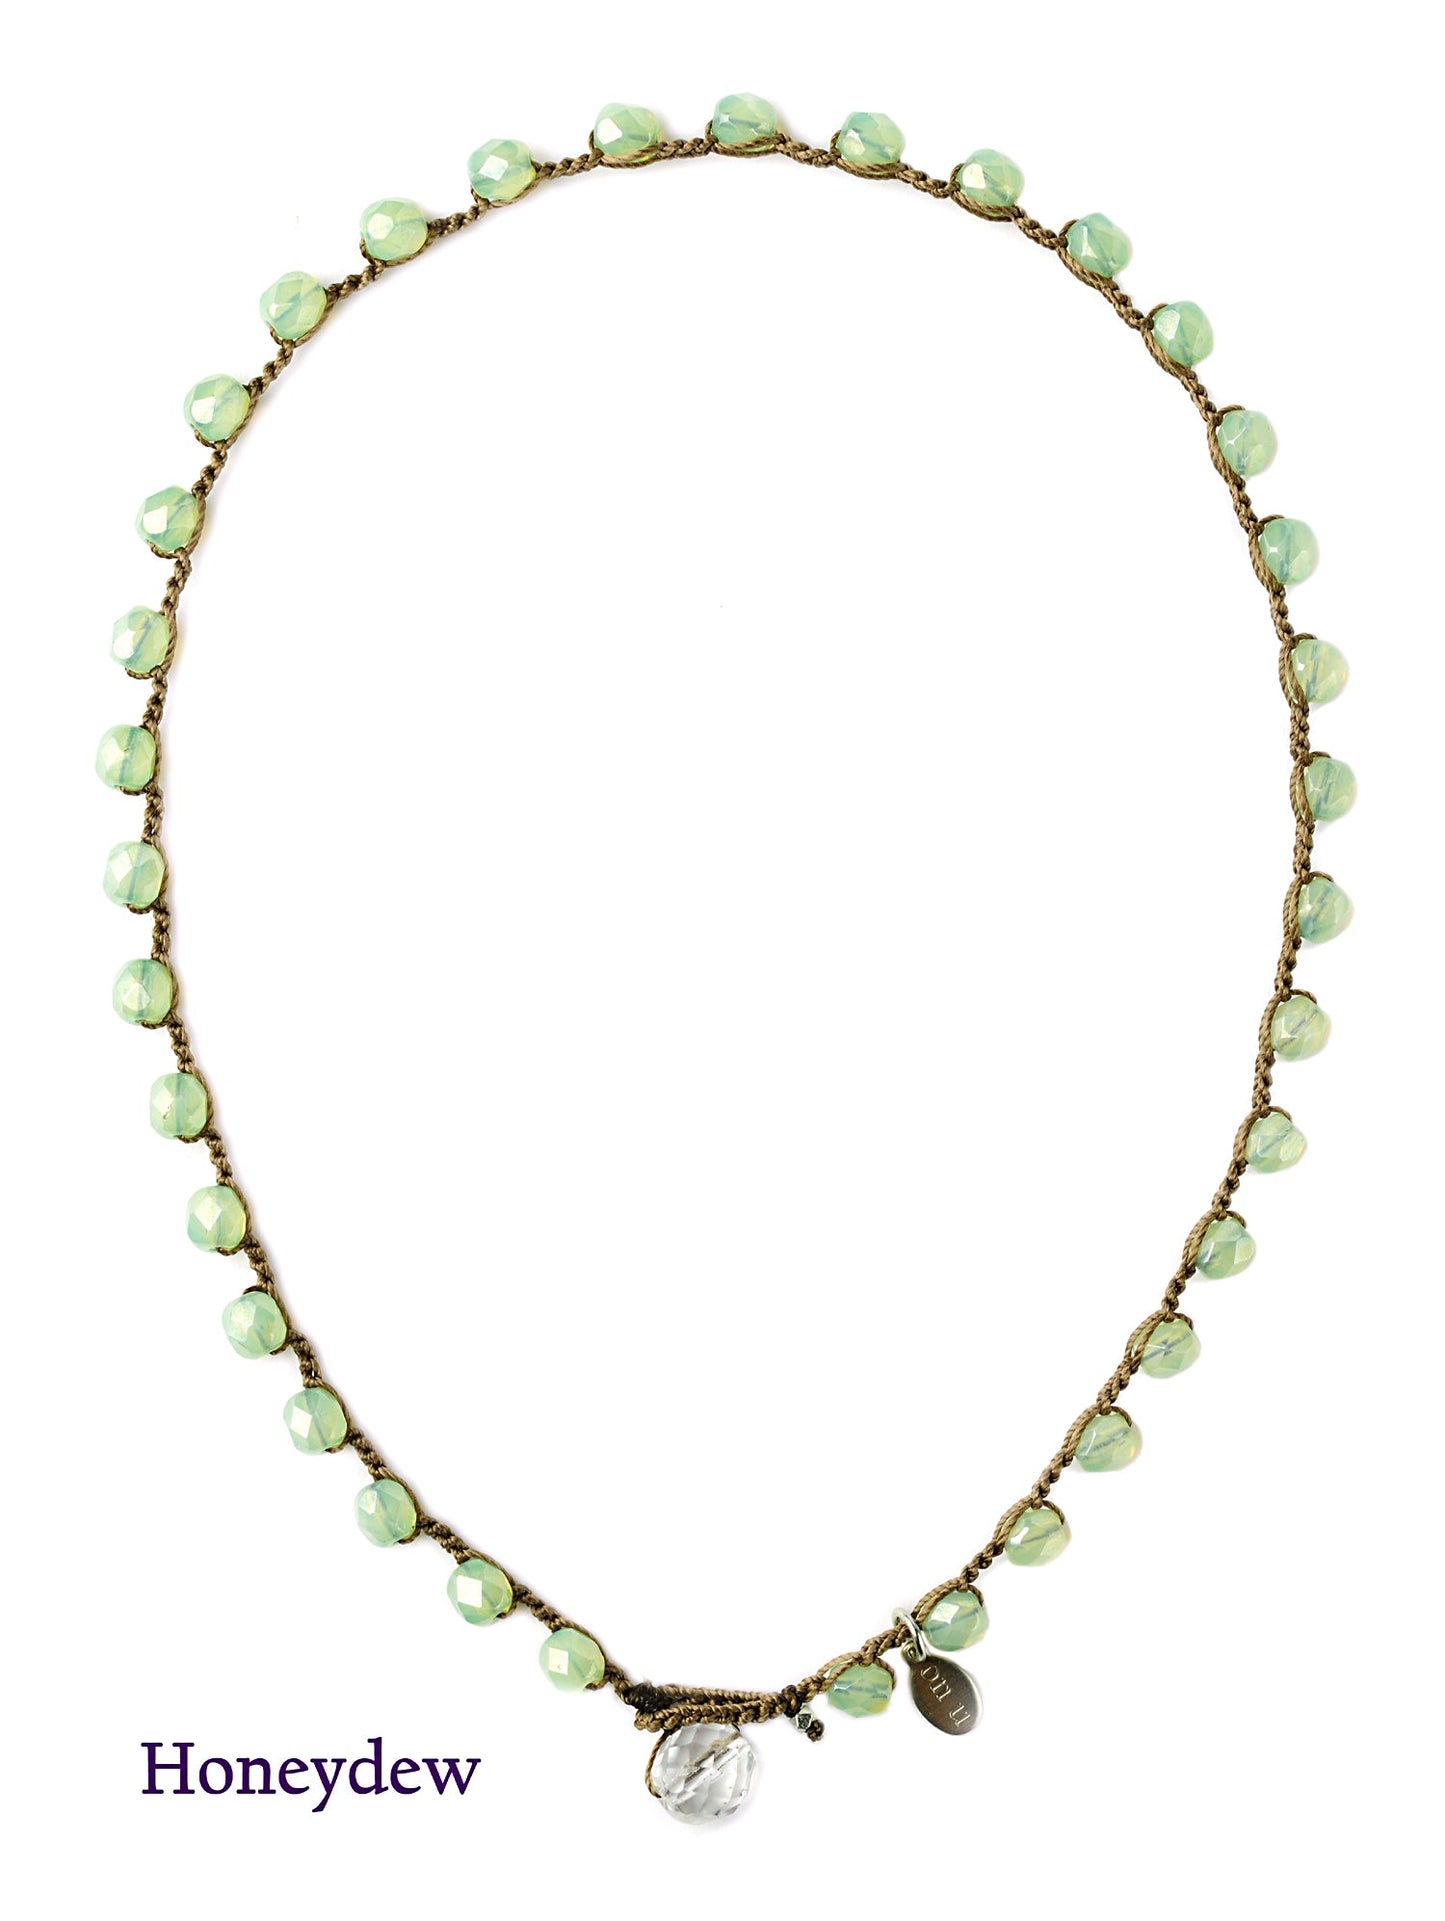 onujewelry.com - Large Bead Dot Necklace in Honeydew.  Designed, and created, by Donna Silvestri, On U Jewelry, Richmond, VA